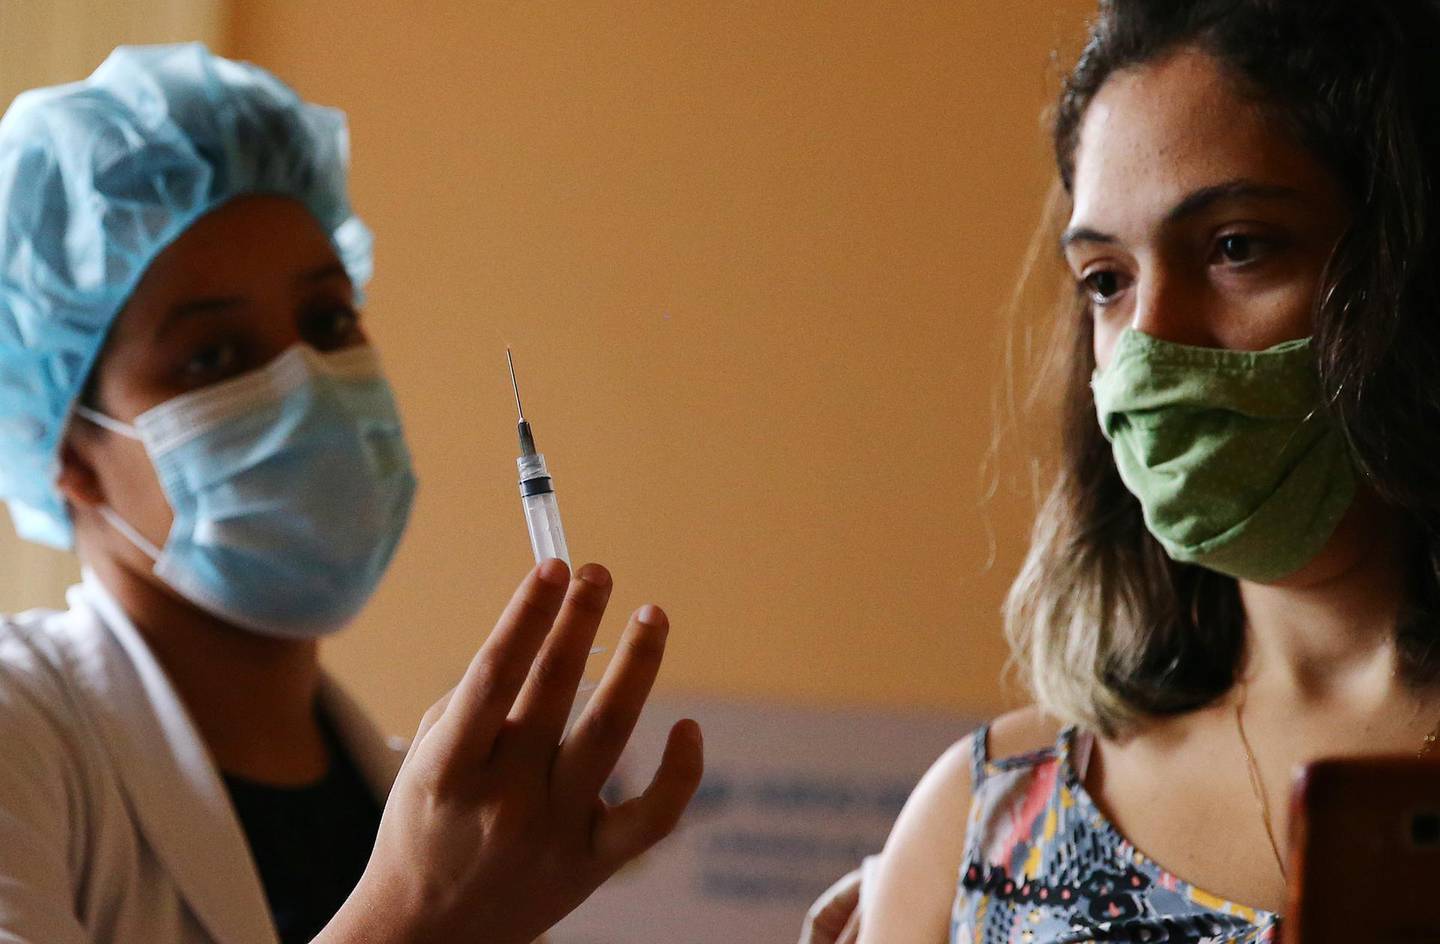 RIO DE JANEIRO, BRAZIL - MAY 24: Nurse-in-training Julia Ramos displays the empty syringe after vaccinating a person at a COVID-19 vaccination clinic at Museu da Republica (Museum of the Republic) on May 24, 2021 in Rio de Janeiro, Brazil. COVID-19 has claimed more than 1 million lives in Latin America and the Caribbean, with nearly half of those deaths in Brazil. Only three percent of the population of Latin America has been fully vaccinated against COVID-19. Health experts are warning that Brazil should brace for a new surge of COVID-19 amid a slow vaccine rollout and relaxed restrictions. Nearly 450,000 people have died in Brazil by COVID-19, second only to the U.S. (Photo by Mario Tama/Getty Images)